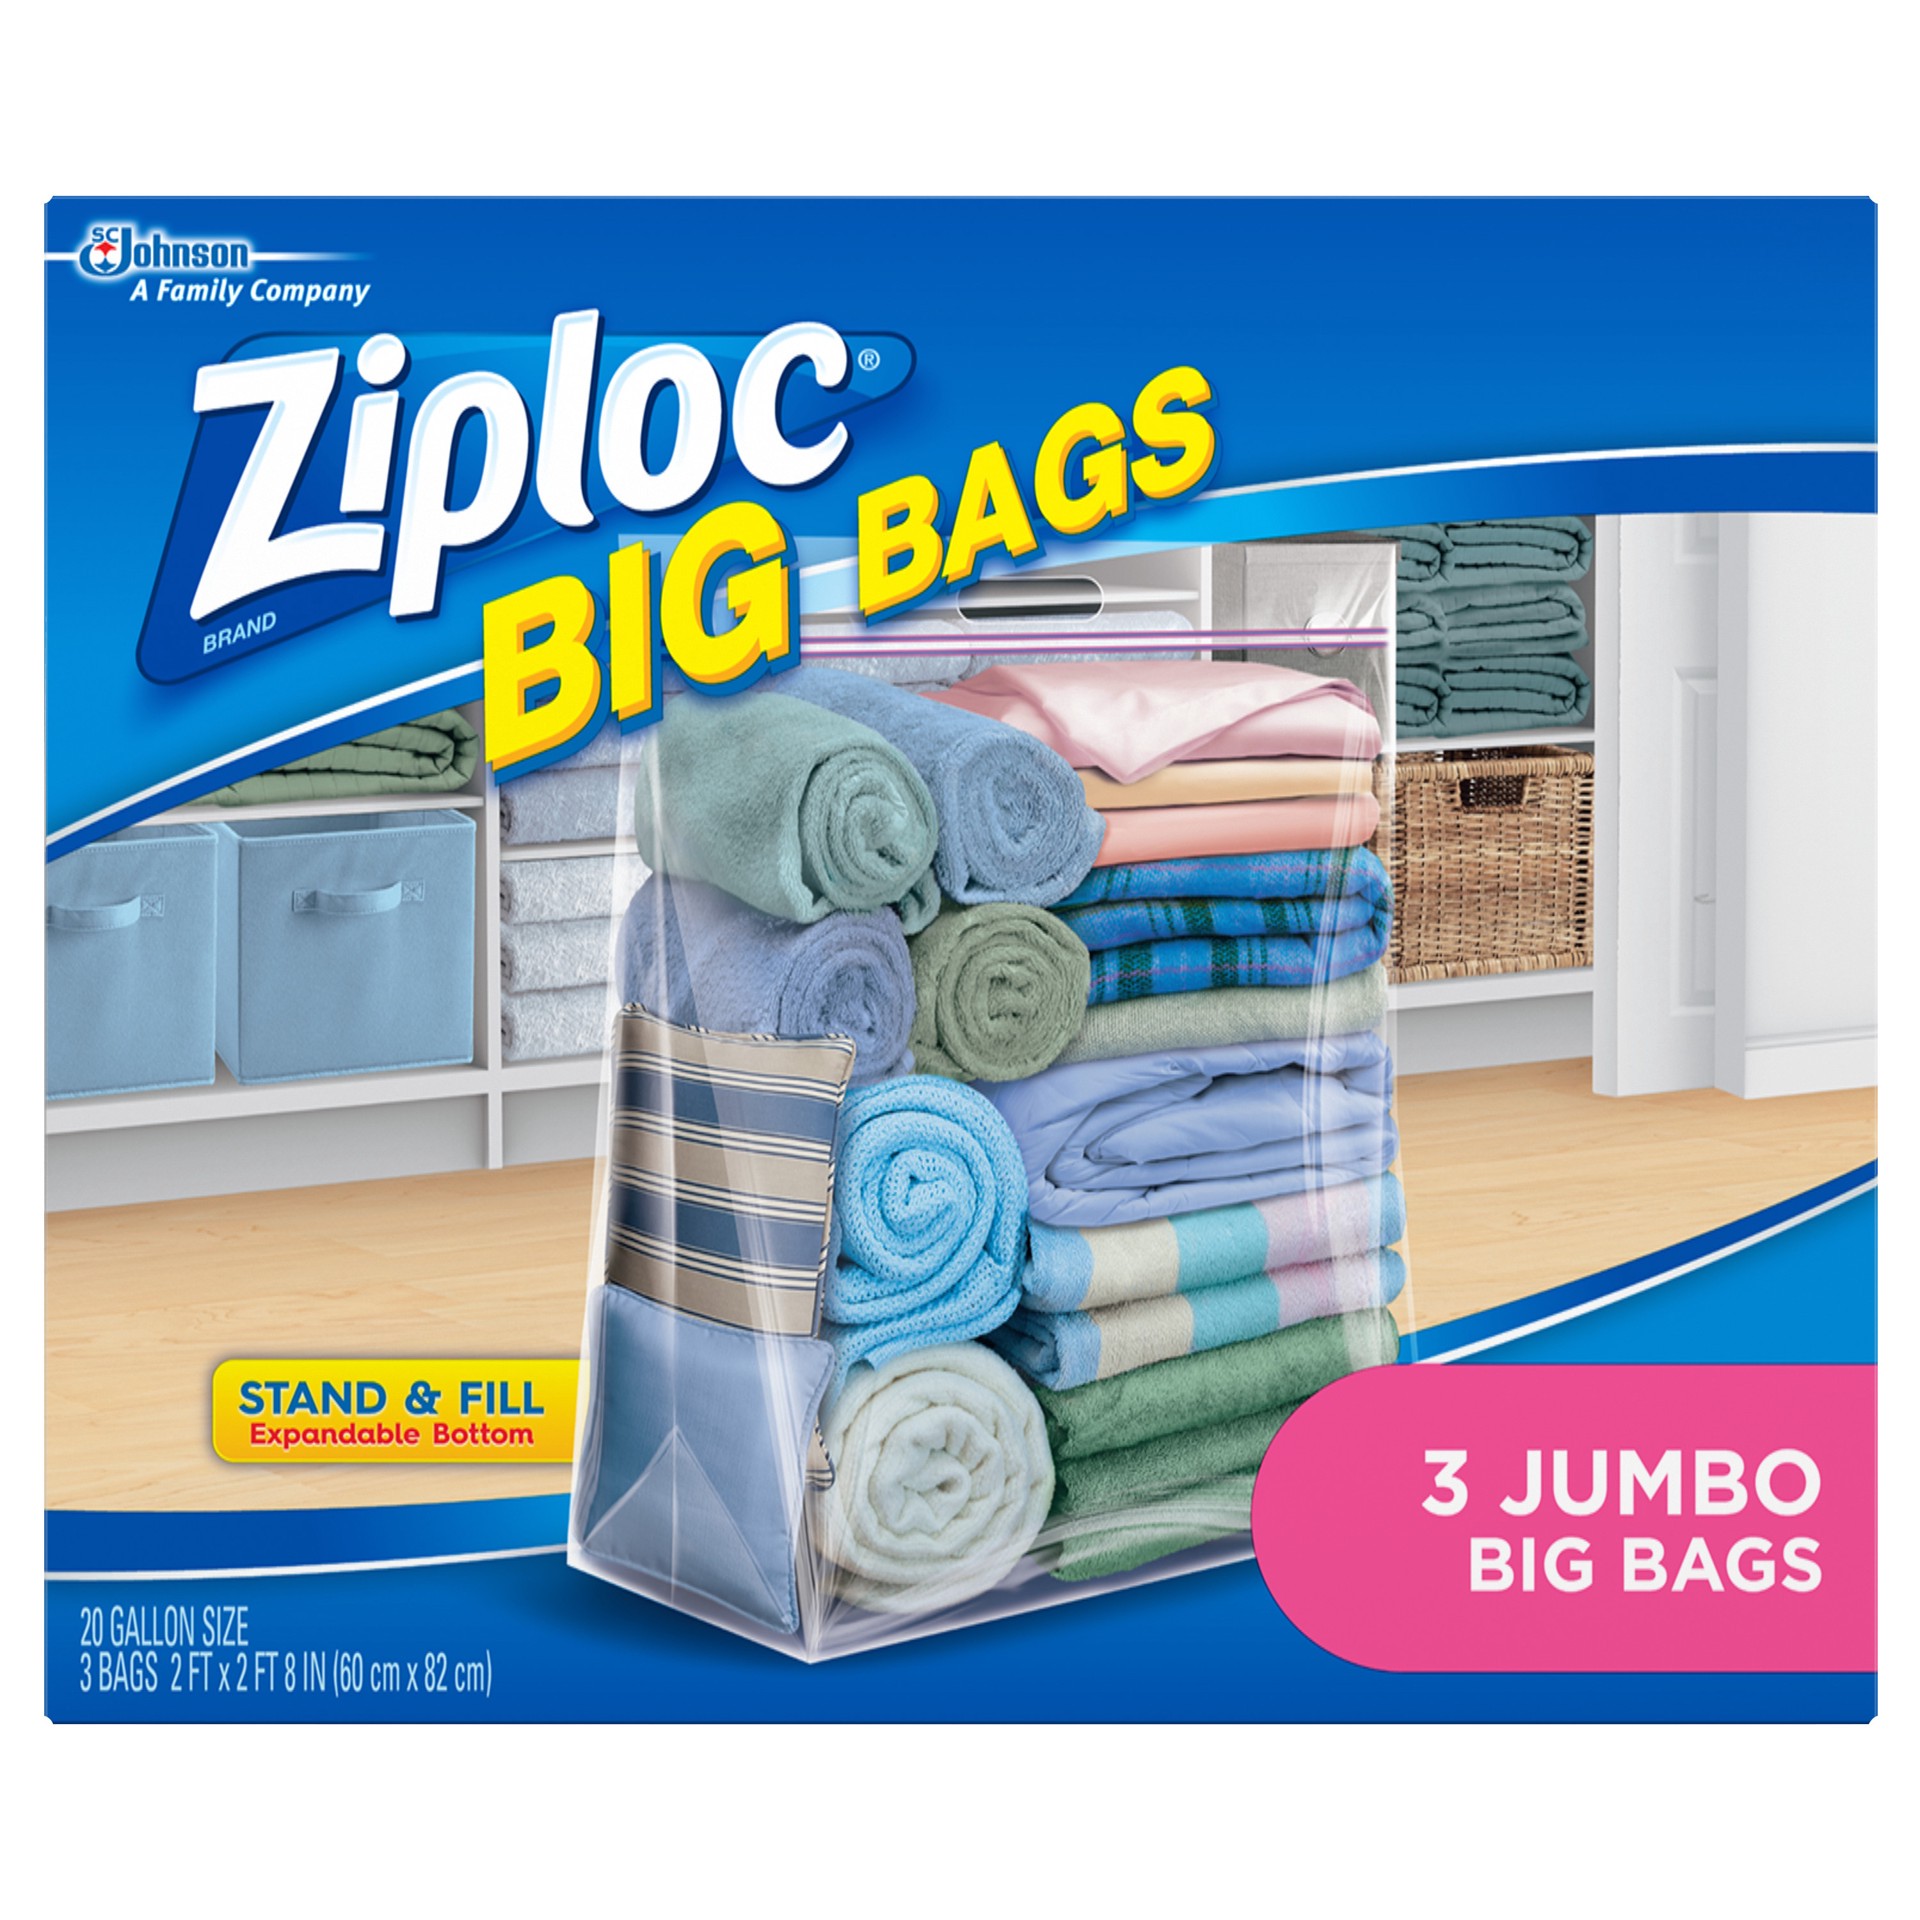 slide 2 of 5, Ziploc Big Bags, Jumbo, Secure Double Zipper, 3 CT, Expandable Bottom, Heavy-Duty Plastic, Built-In Handles, Flexible Shape to Fit Where Storage Boxes Can't, 3 ct